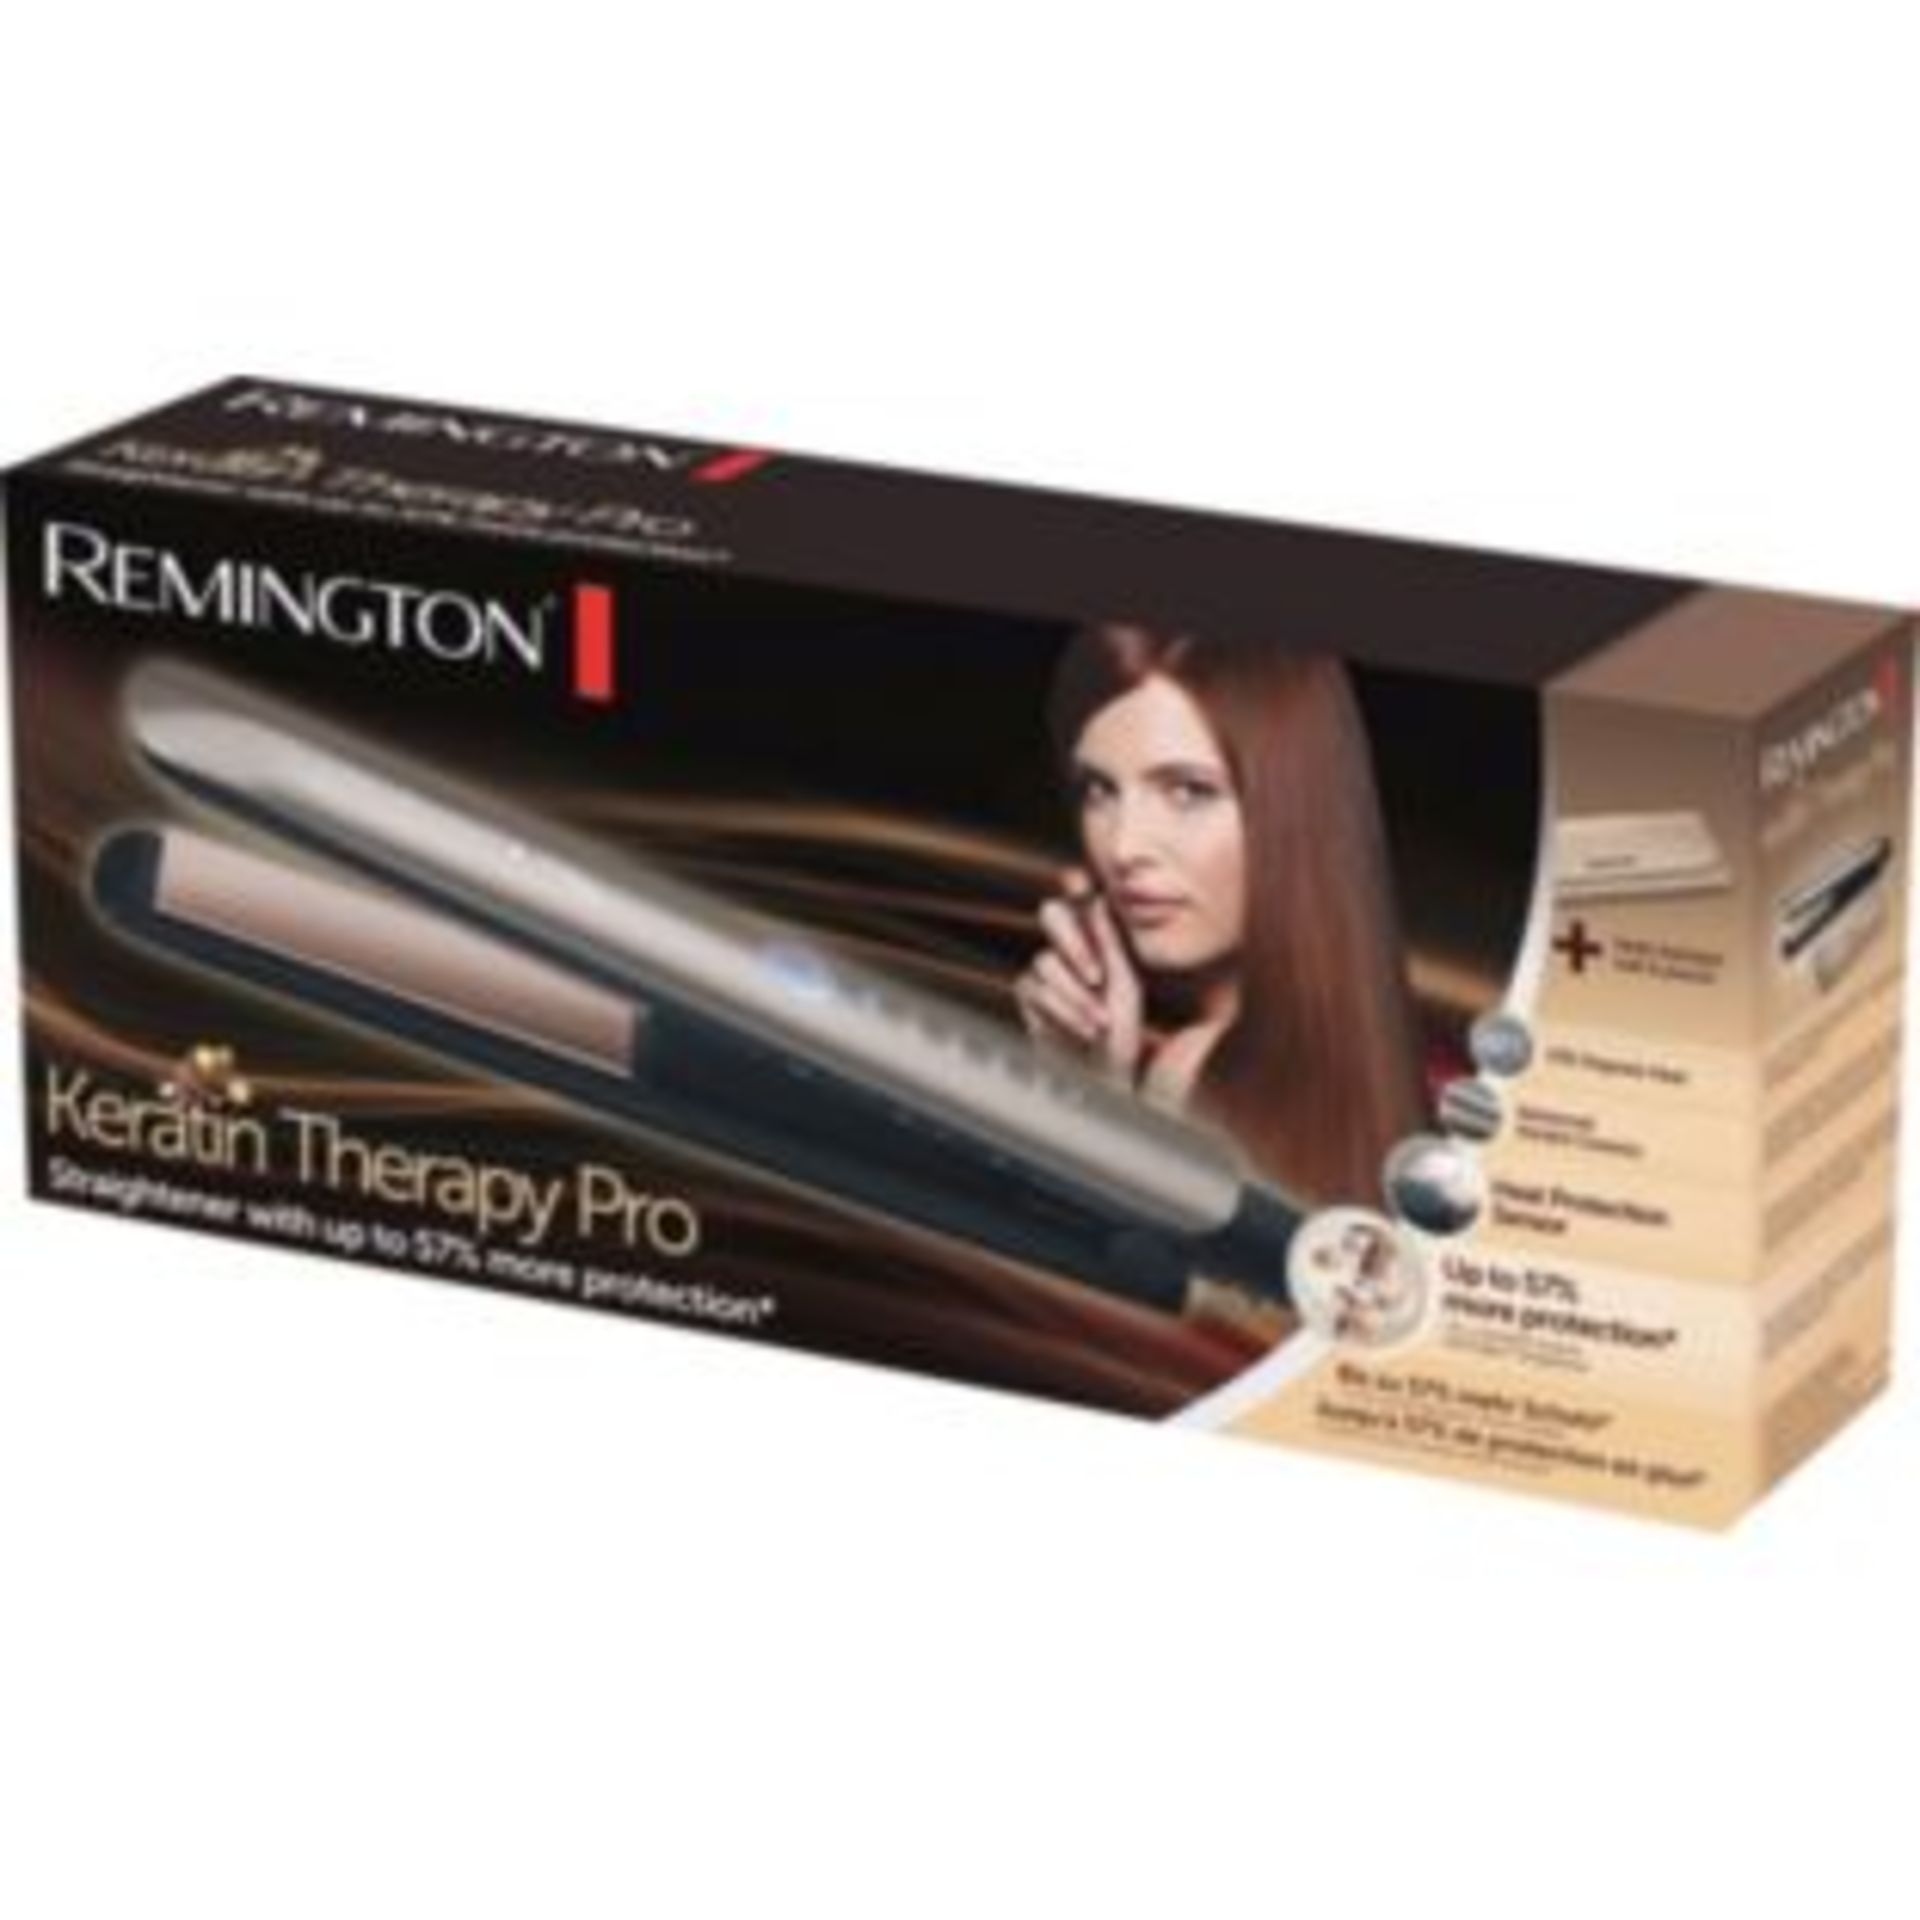 V Brand New Remington Keratin Therapy Pro Straighteners With 57% More Protection (As Seen On TV) - Image 2 of 2